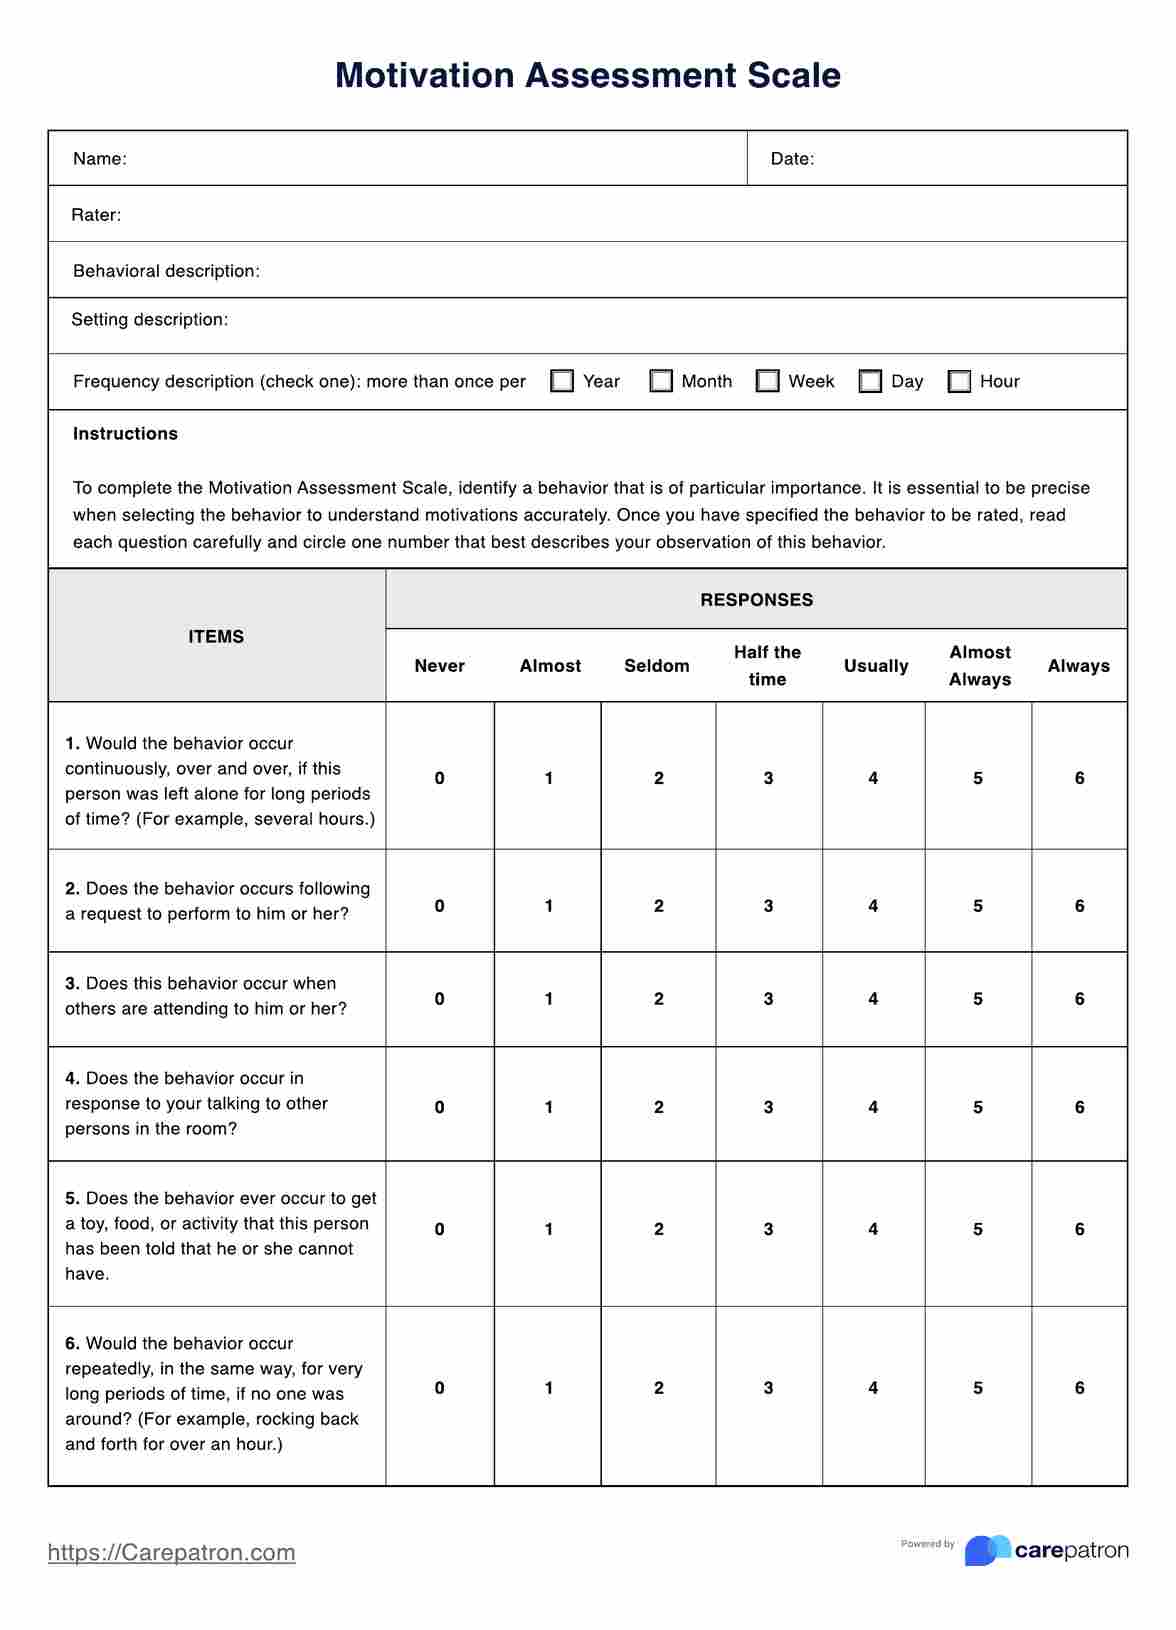 Motivation Assessment Scale PDF Example